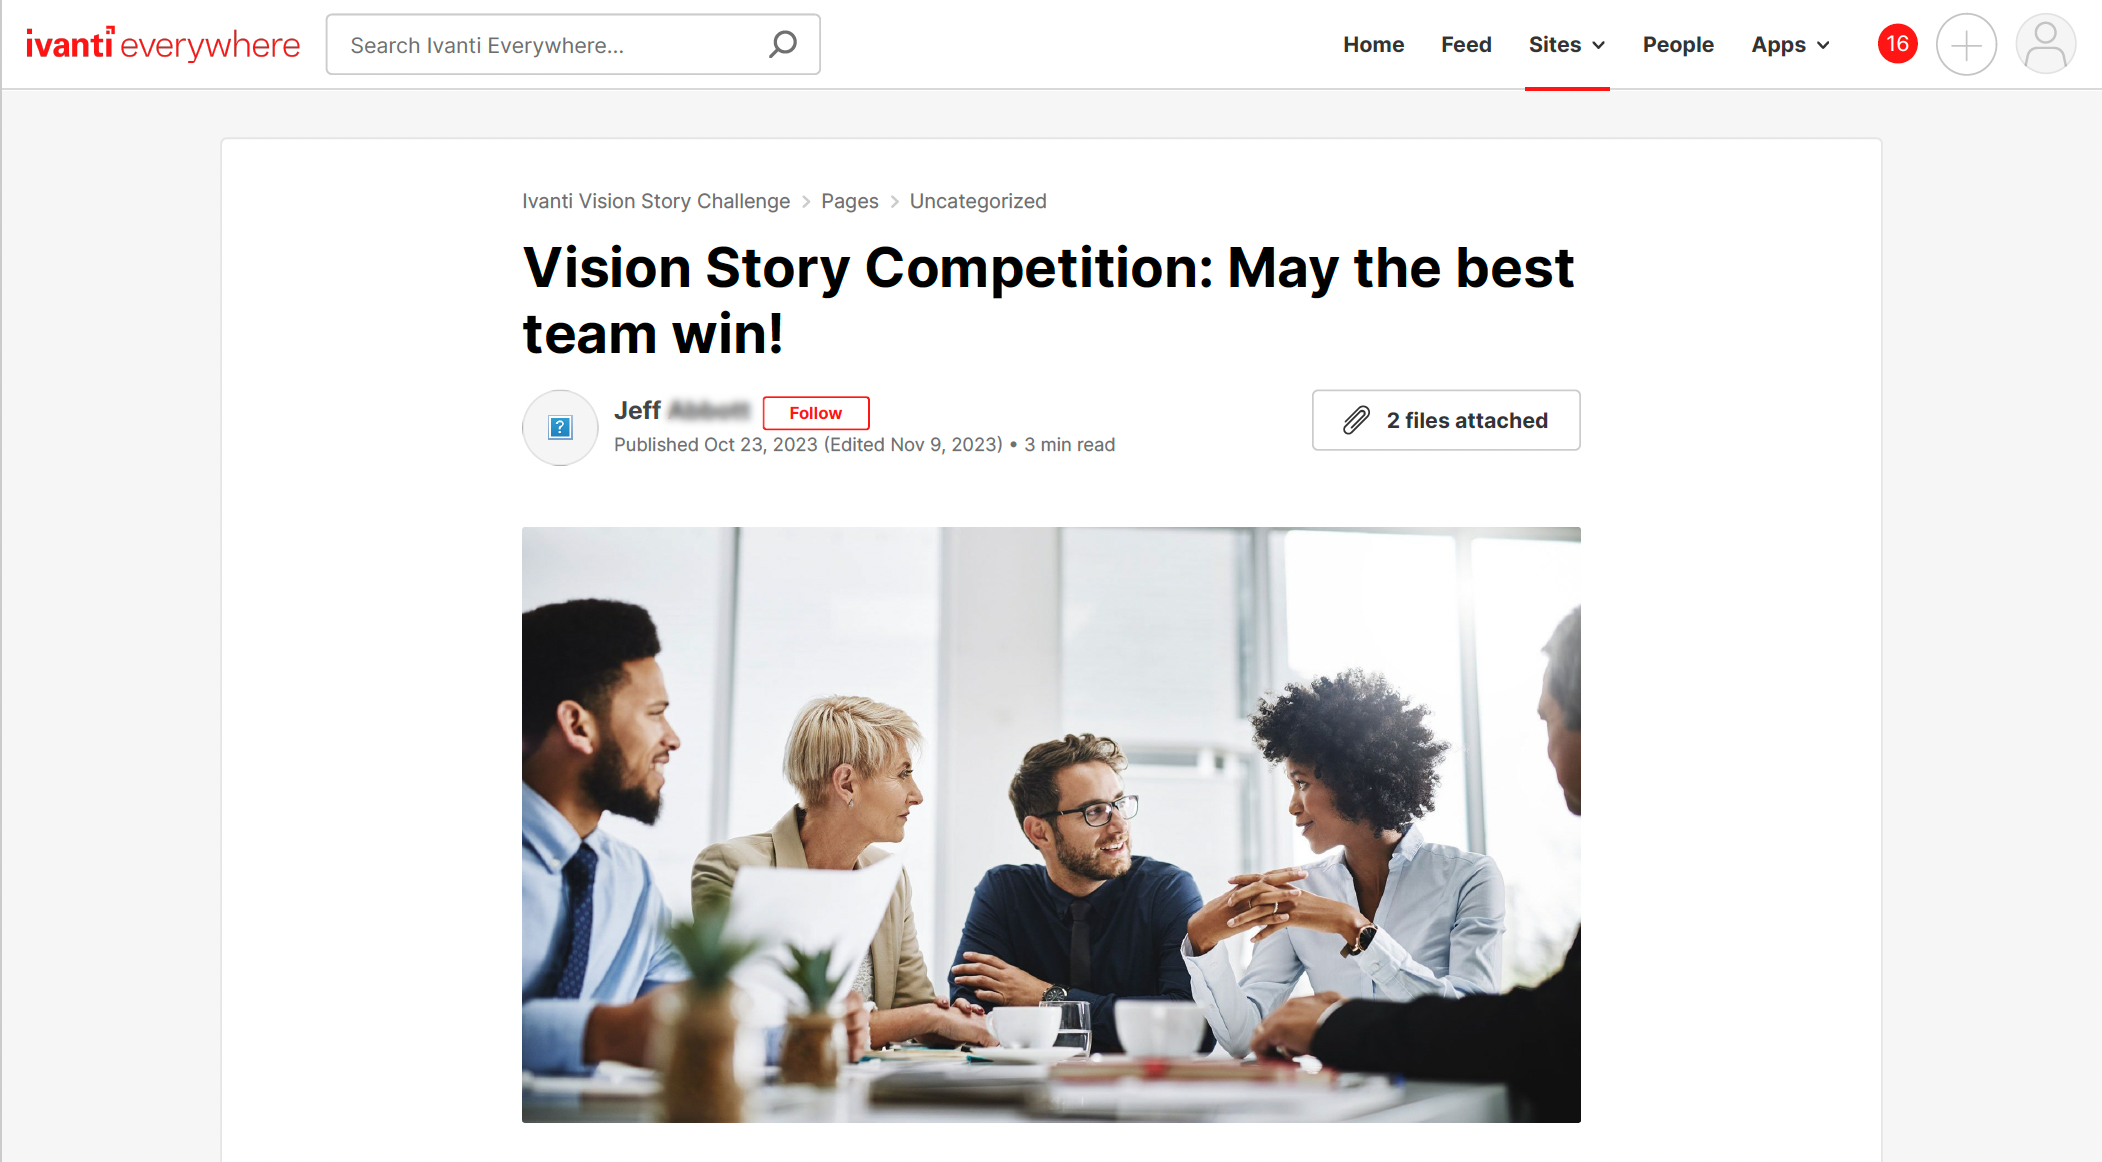 Ivanti leveraged their intranet, Ivanti Everywhere (IE), to engage employees in a competition designed to strengthen their connection with the company’s vision.